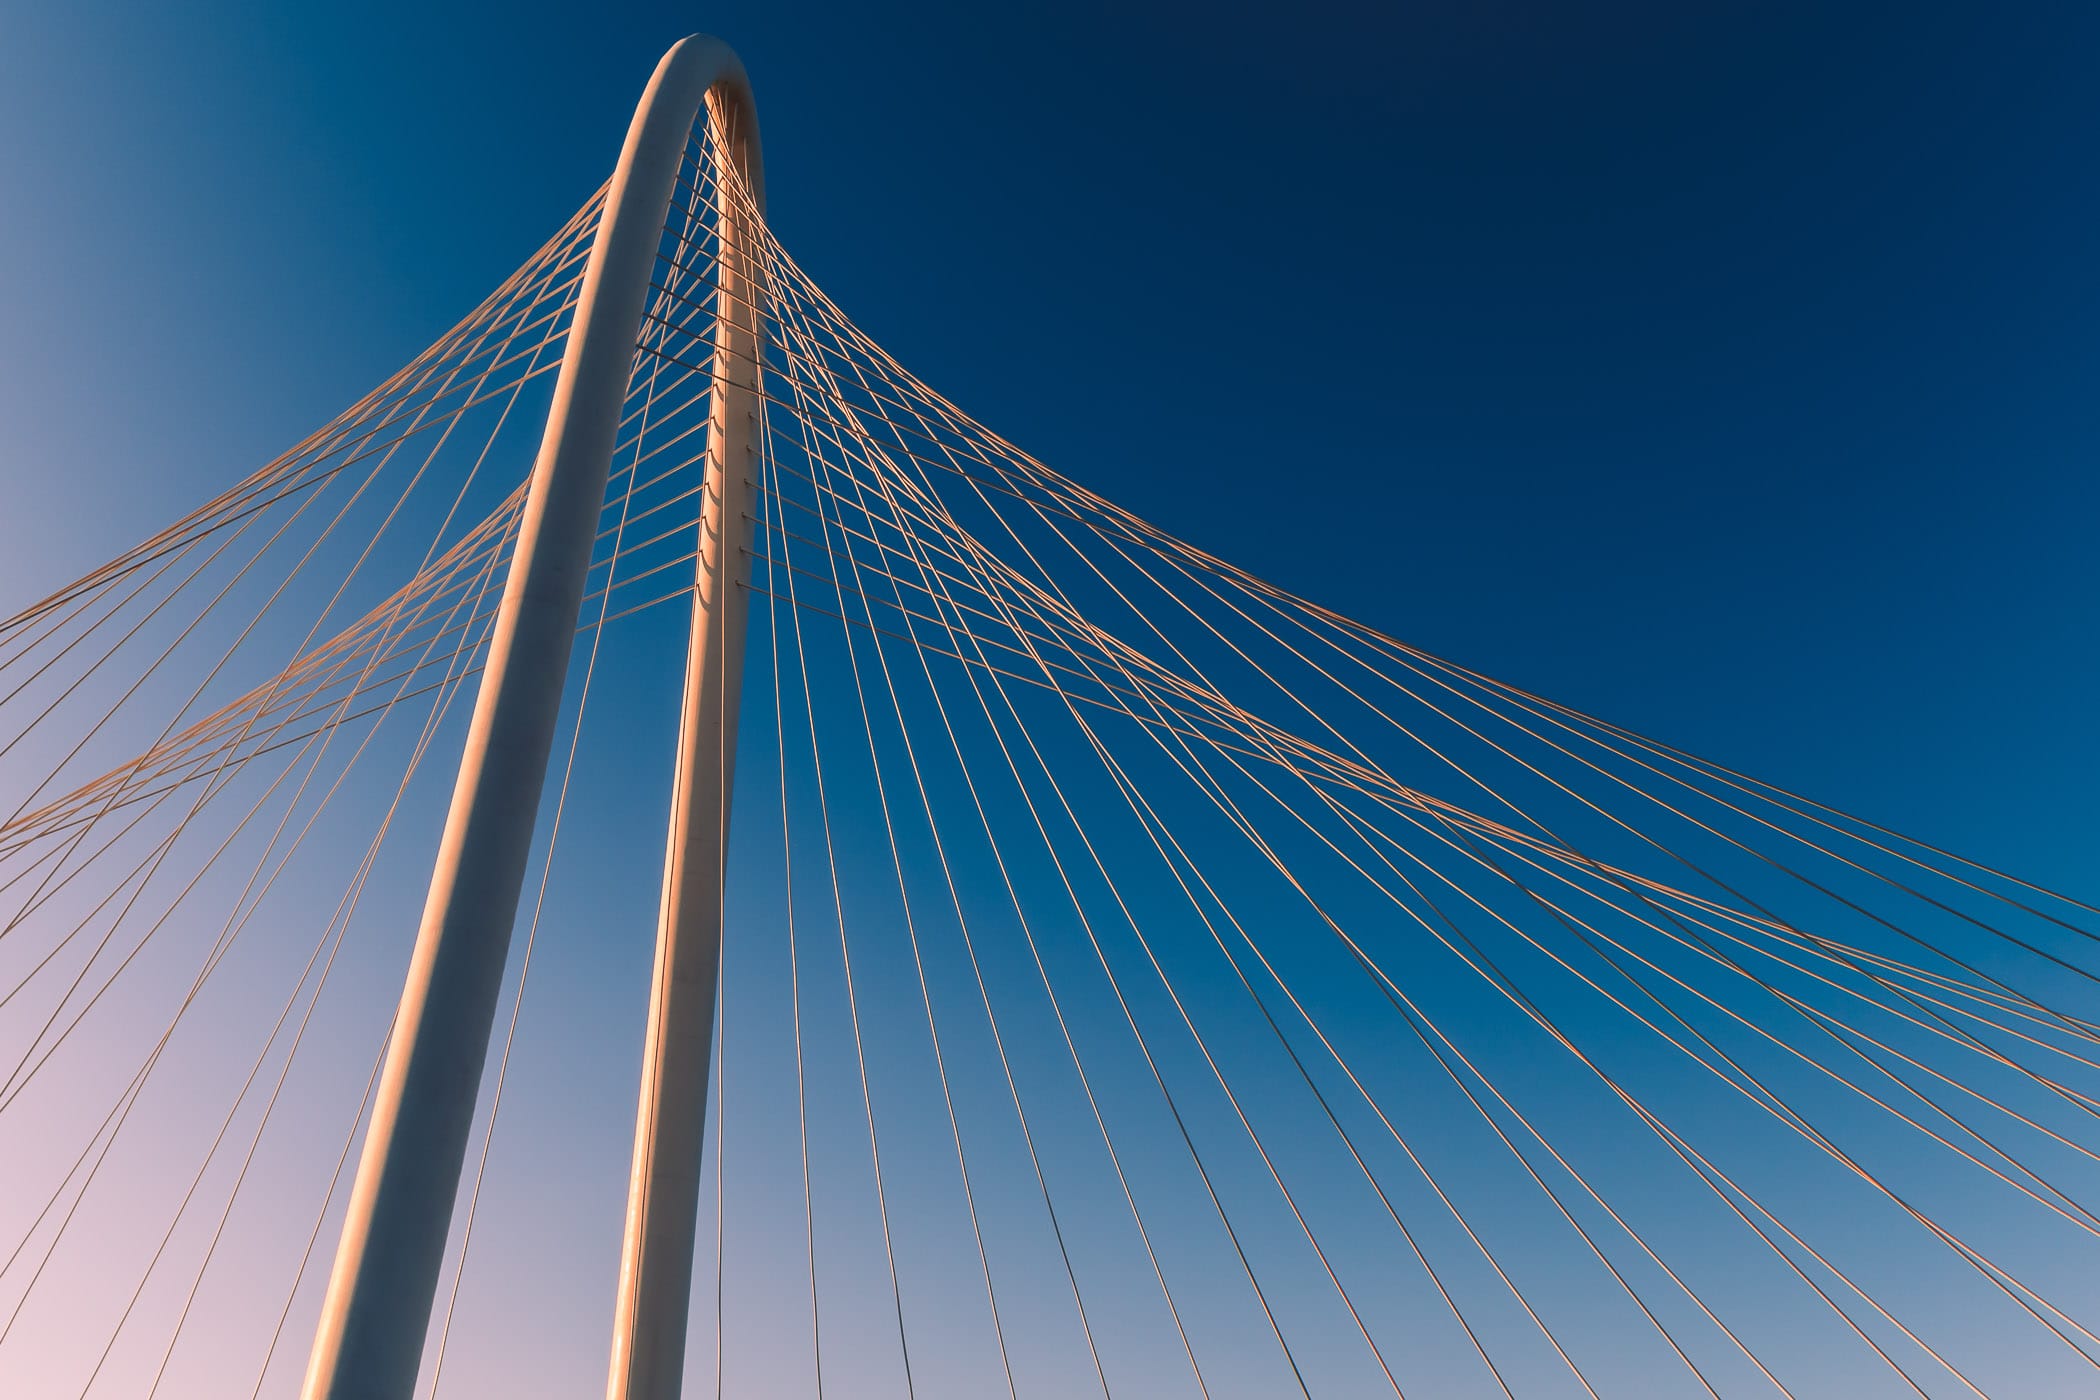 The graceful curve of Dallas' Margaret Hunt Hill Bridge arches through the morning sky.